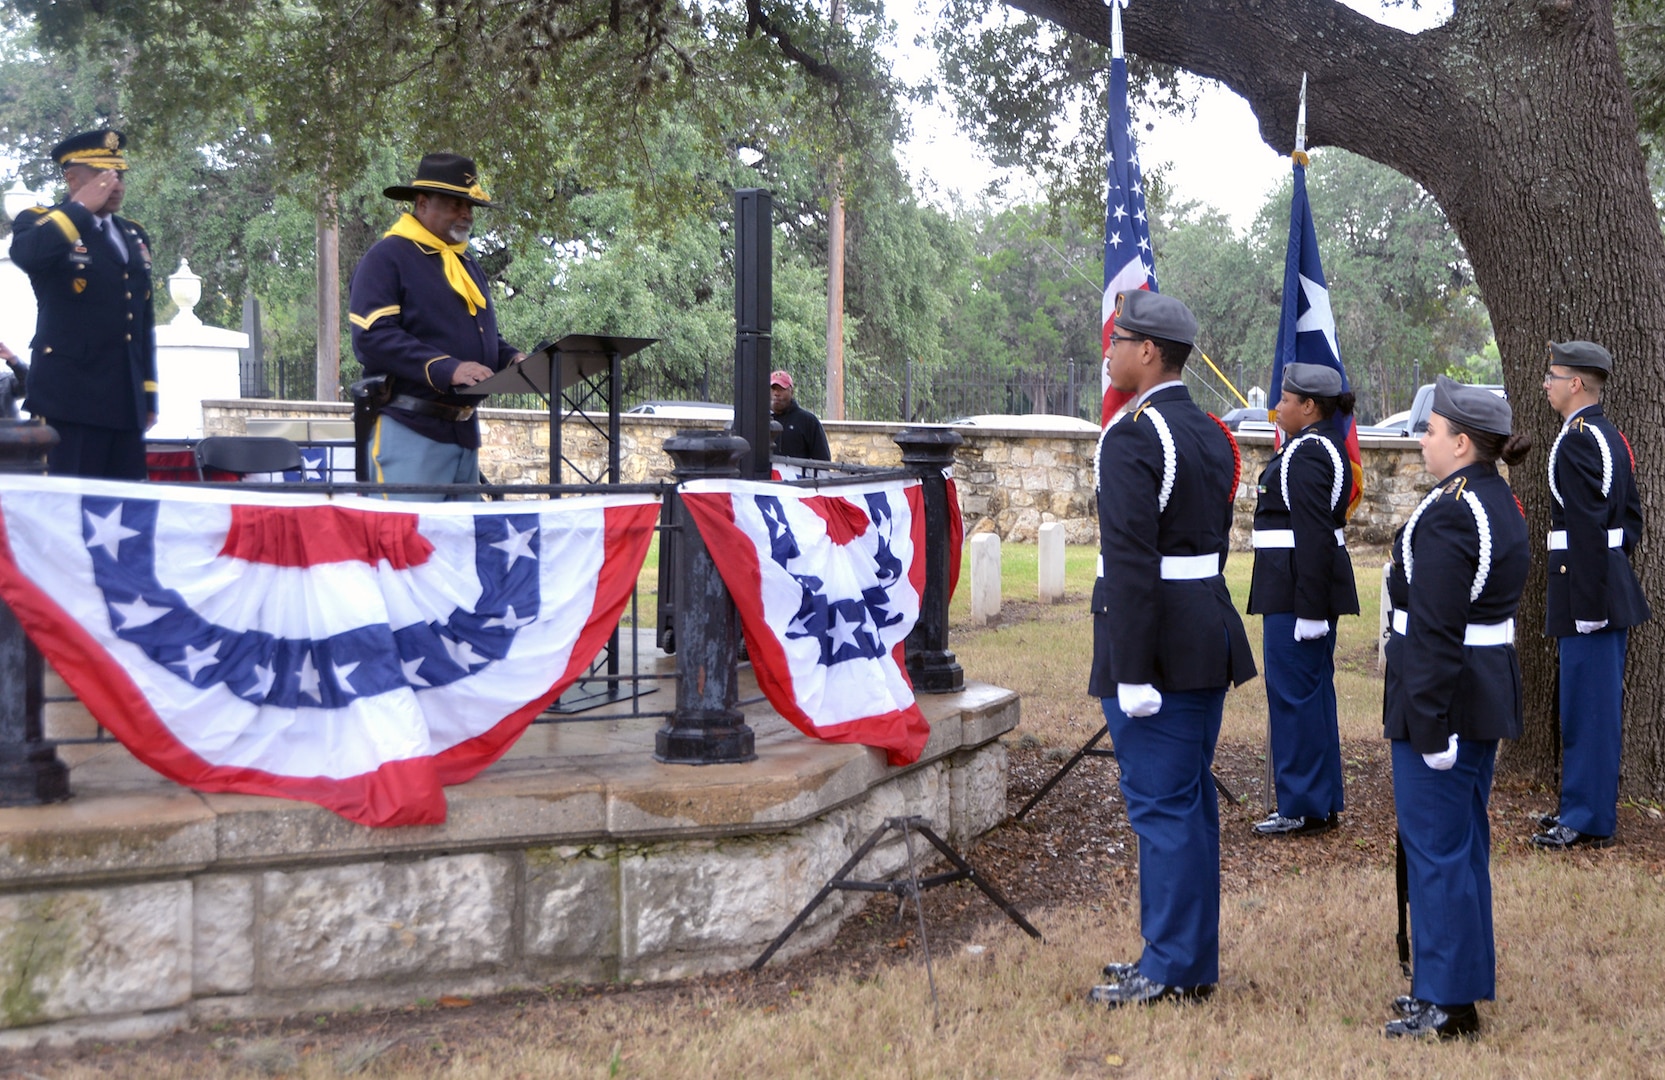 Comprised of former slaves, freed men and Black Civil War veterans, the historic Buffalo Soldiers persevered through the most difficult conditions imaginable to become some of the most elite and most decorated units in the U.S. Army. The annual Bexar County Buffalo Soldiers Commemorative Ceremony at the San Antonio National Cemetery Nov. 11 honored these past heroes with a keynote speaker, the reading of a memorial list, military honors and taps and a benediction.